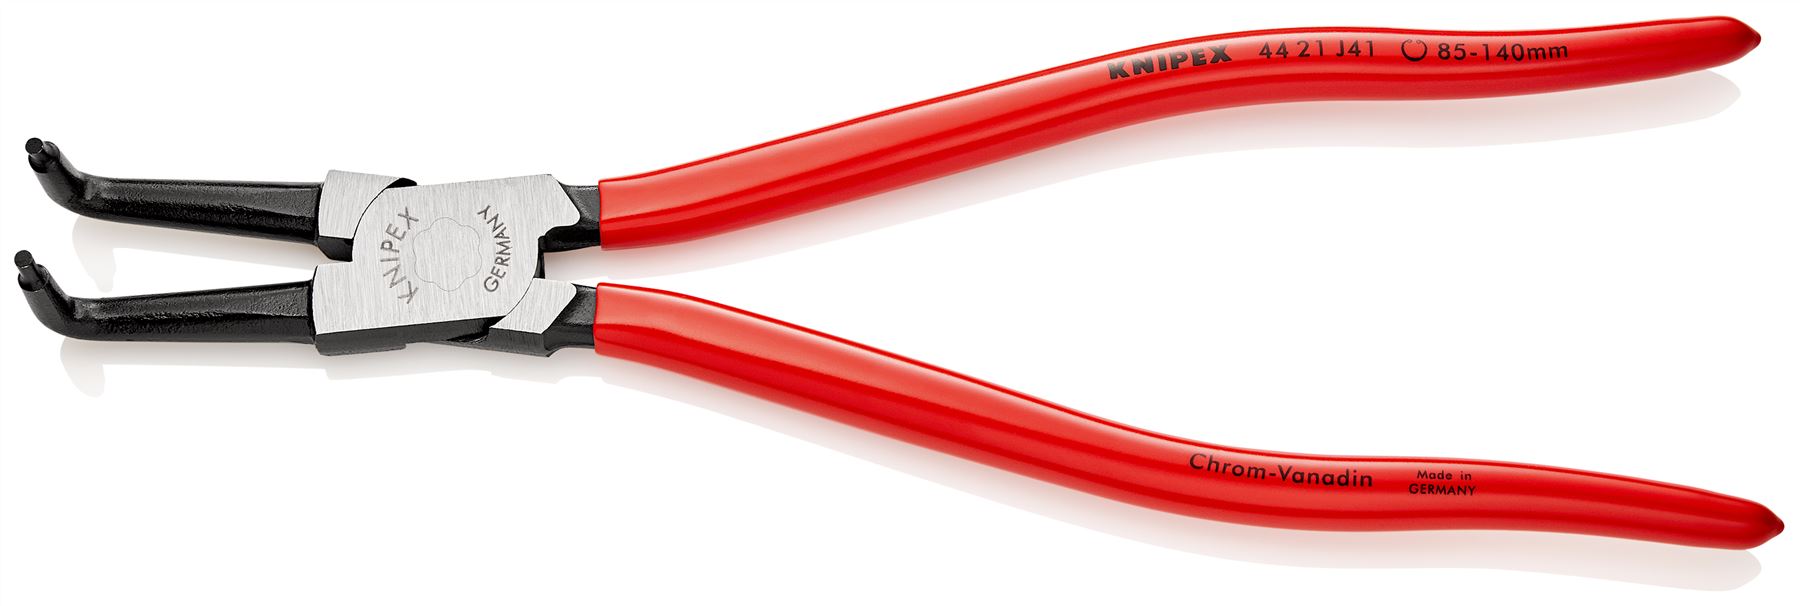 KNIPEX Circlip Pliers for Internal Circlips in Bore Holes Bent Nose 300mm 3.2mm Diameter Tips 44 21 J41